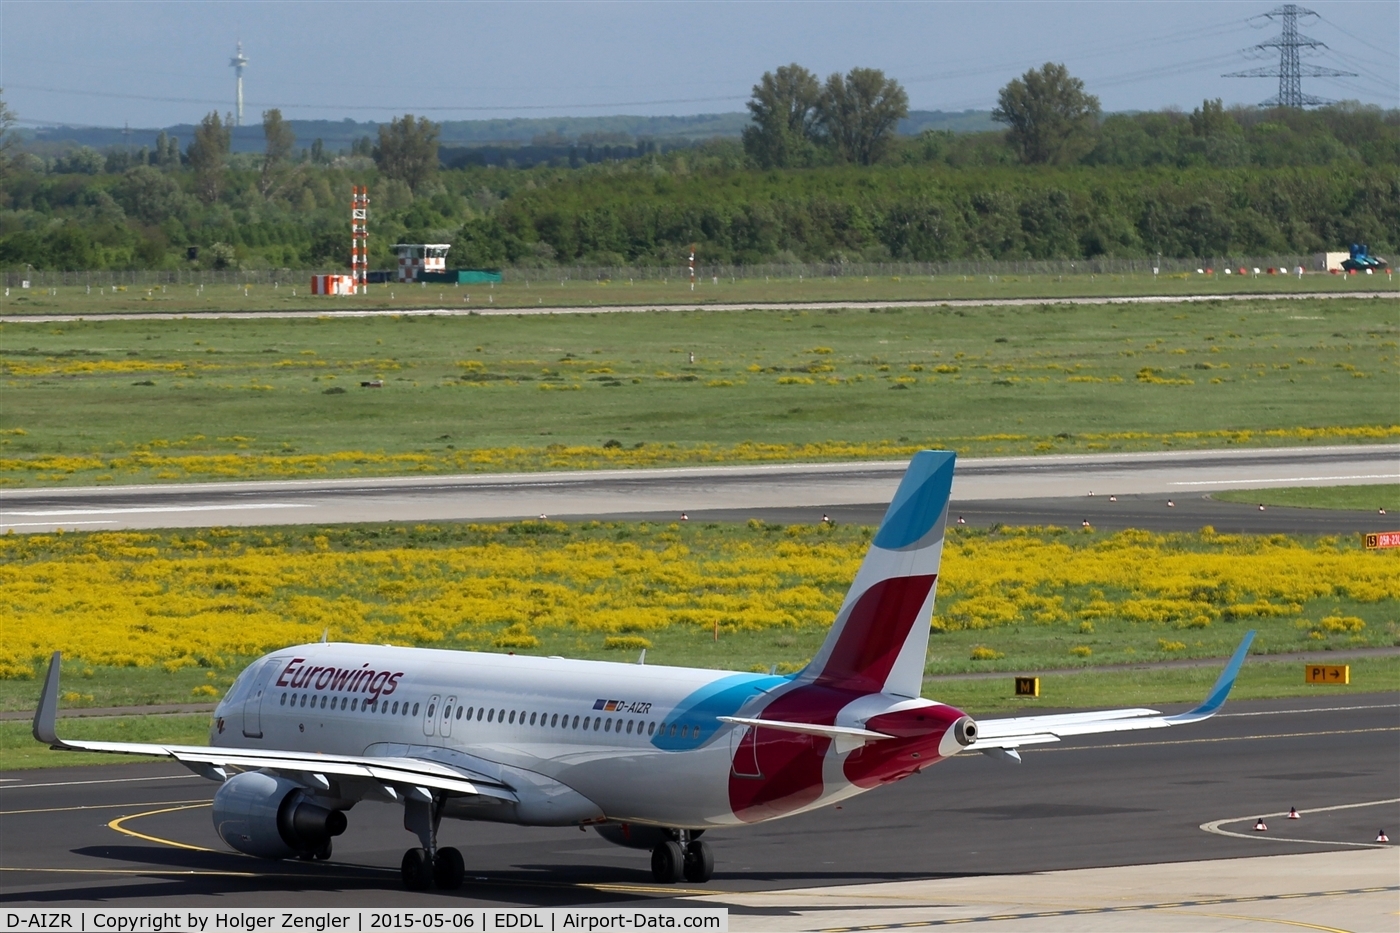 D-AIZR, 2013 Airbus A320-214 C/N 5525, In new EUROWINGS livery....